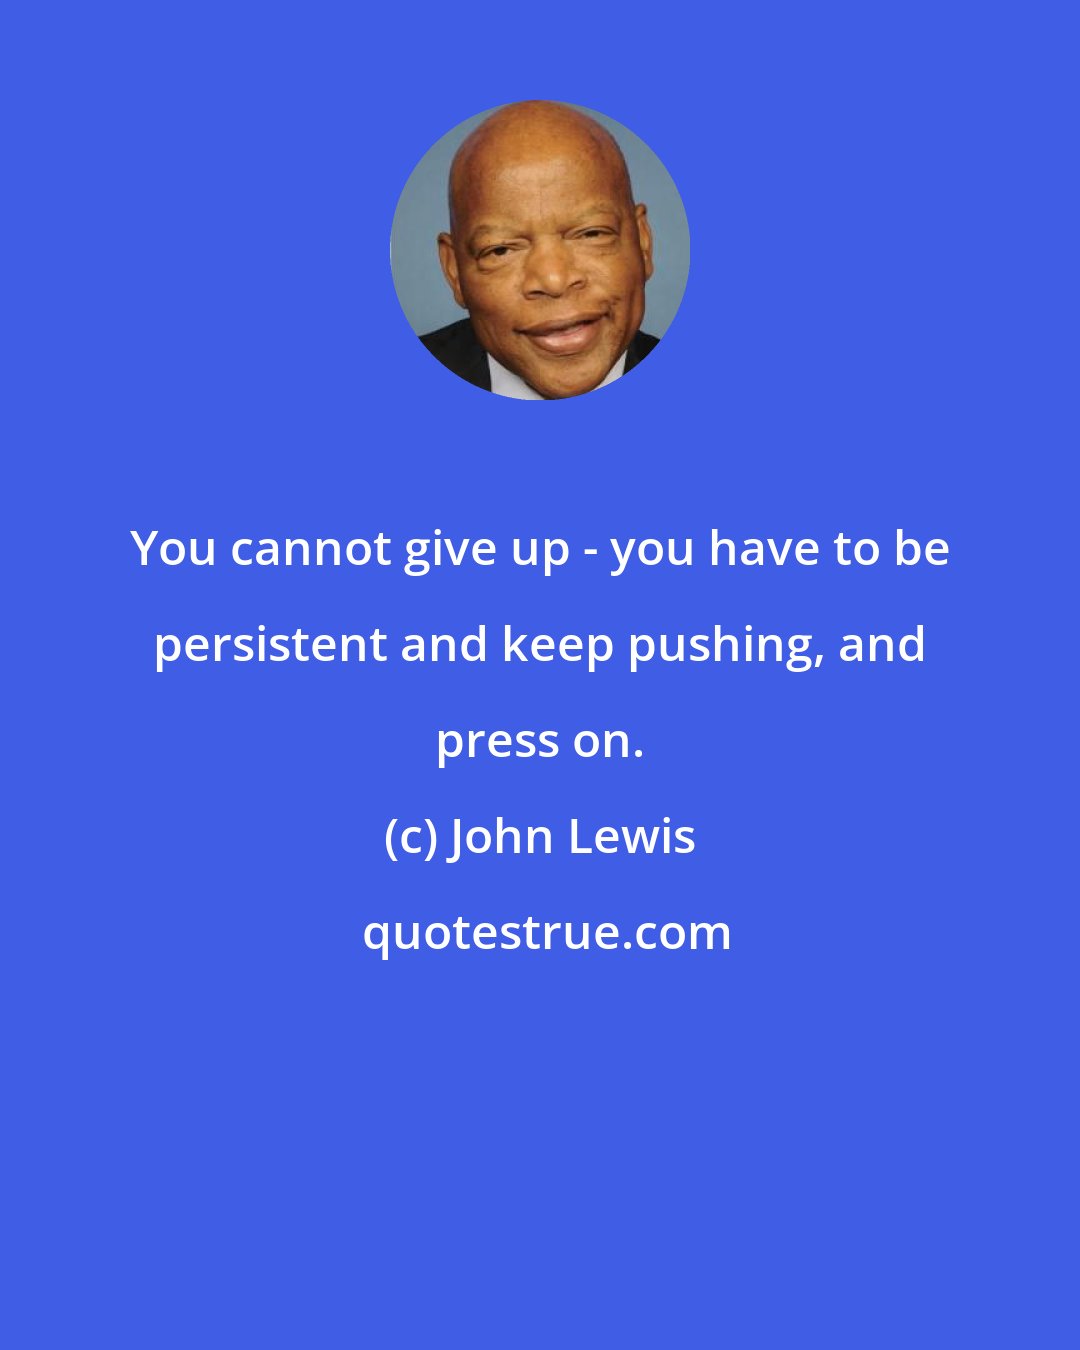 John Lewis: You cannot give up - you have to be persistent and keep pushing, and press on.